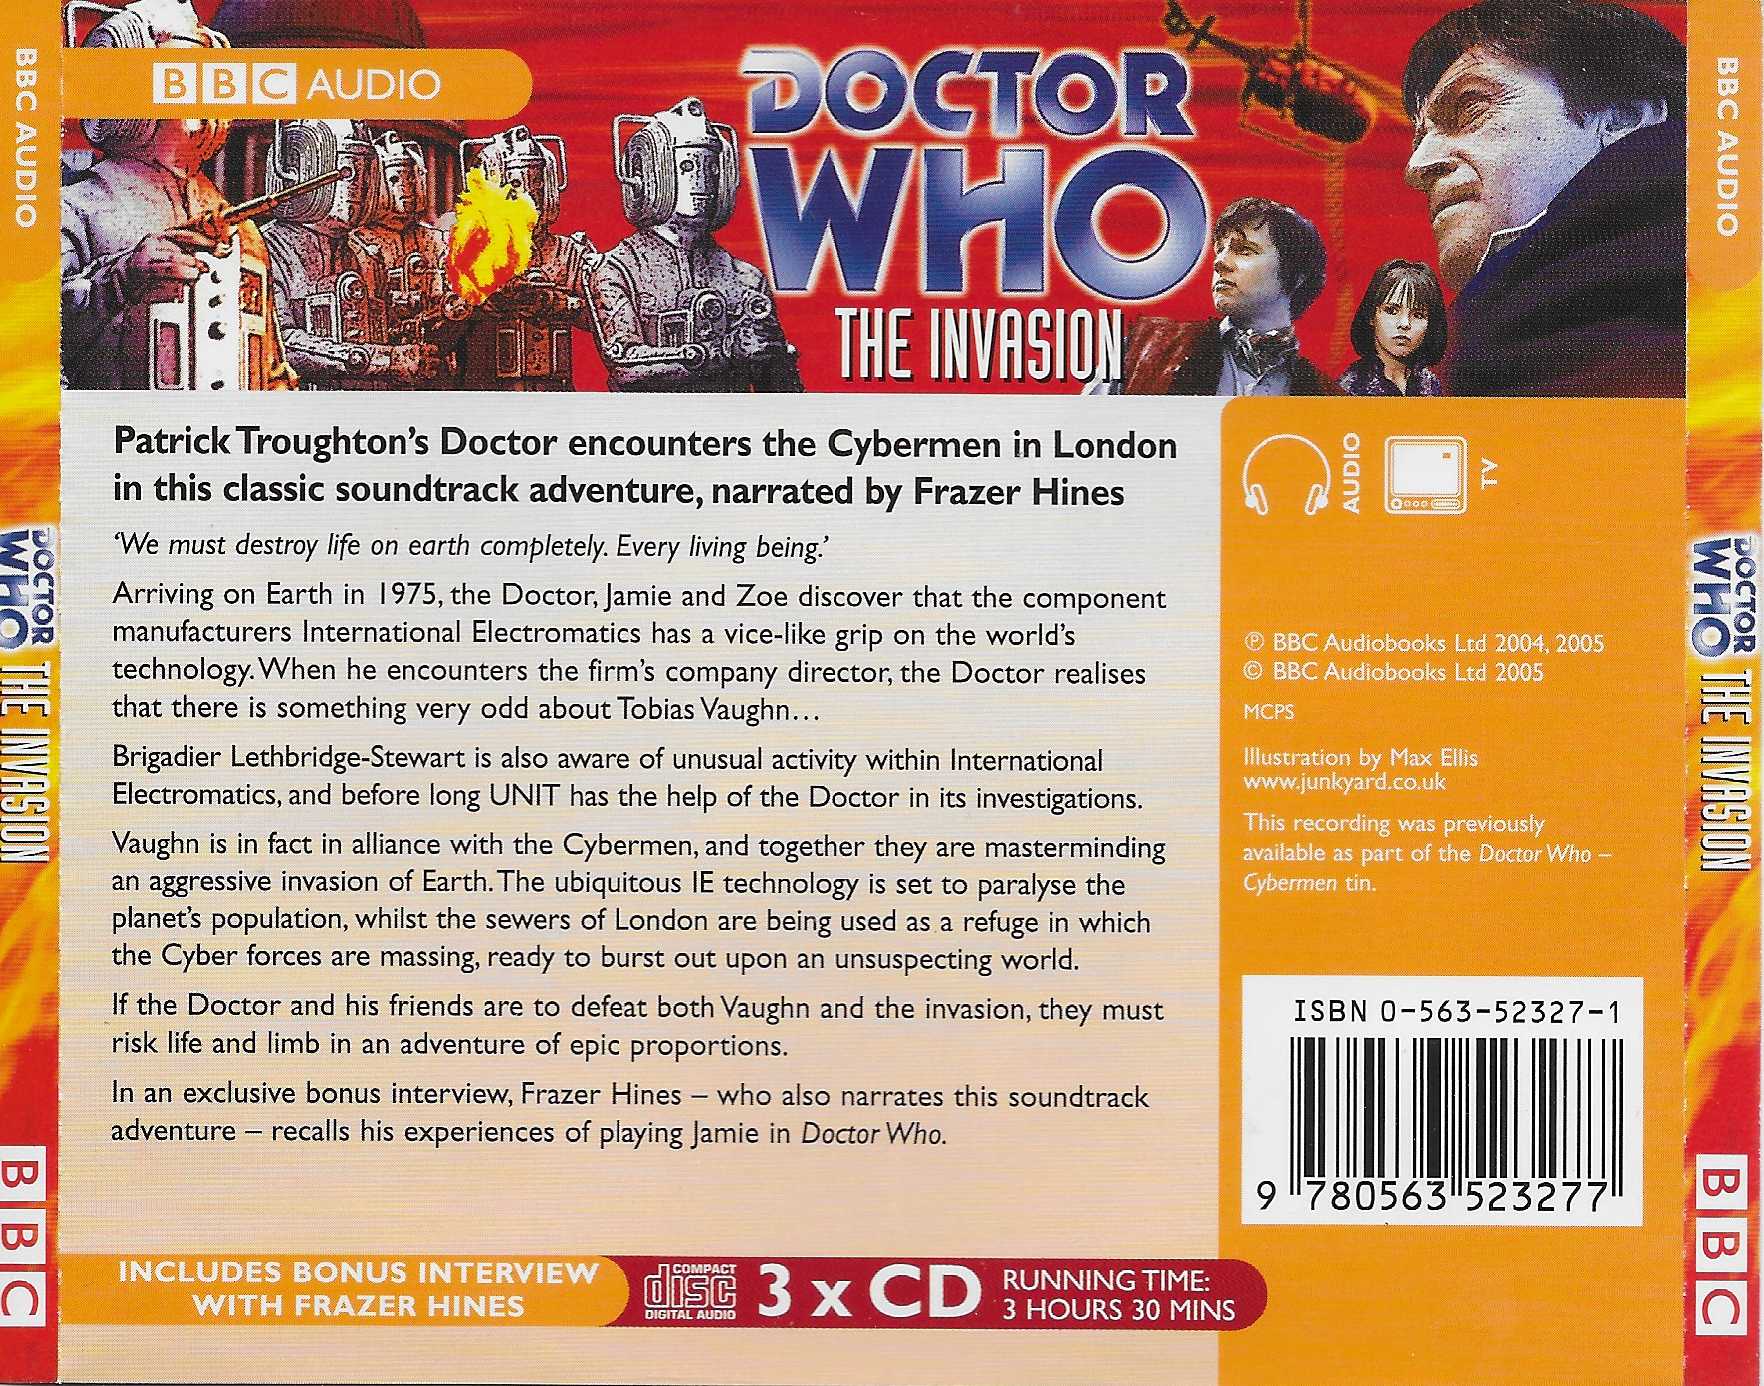 Picture of ISBN 0-563-52327-1 Doctor Who - The invasion by artist Derrick Sherwin / Kit Pedler from the BBC records and Tapes library